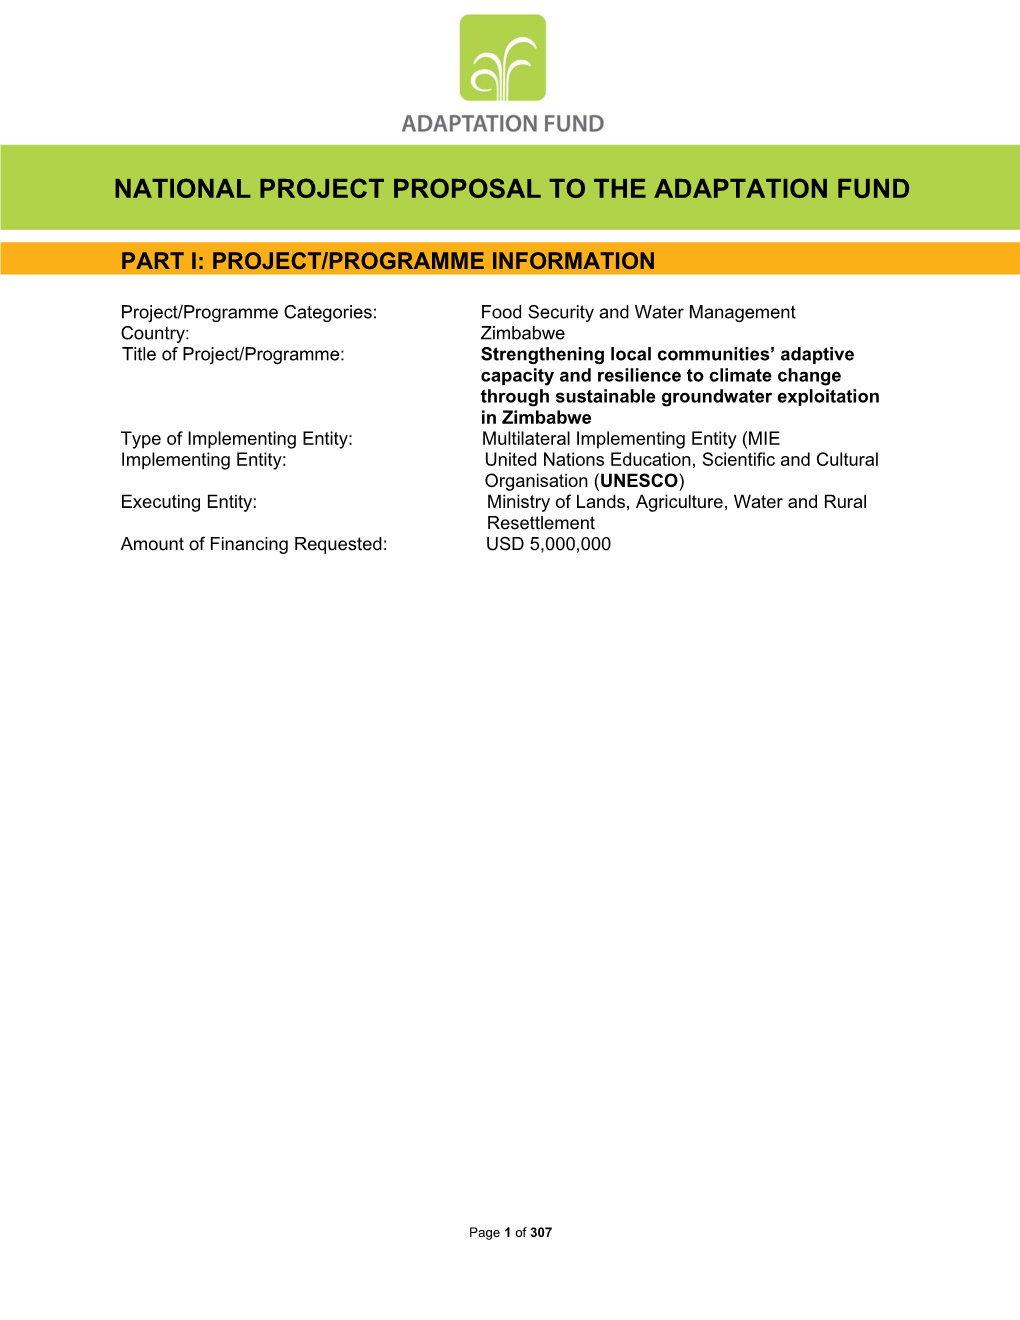 National Project Proposal to the Adaptation Fund